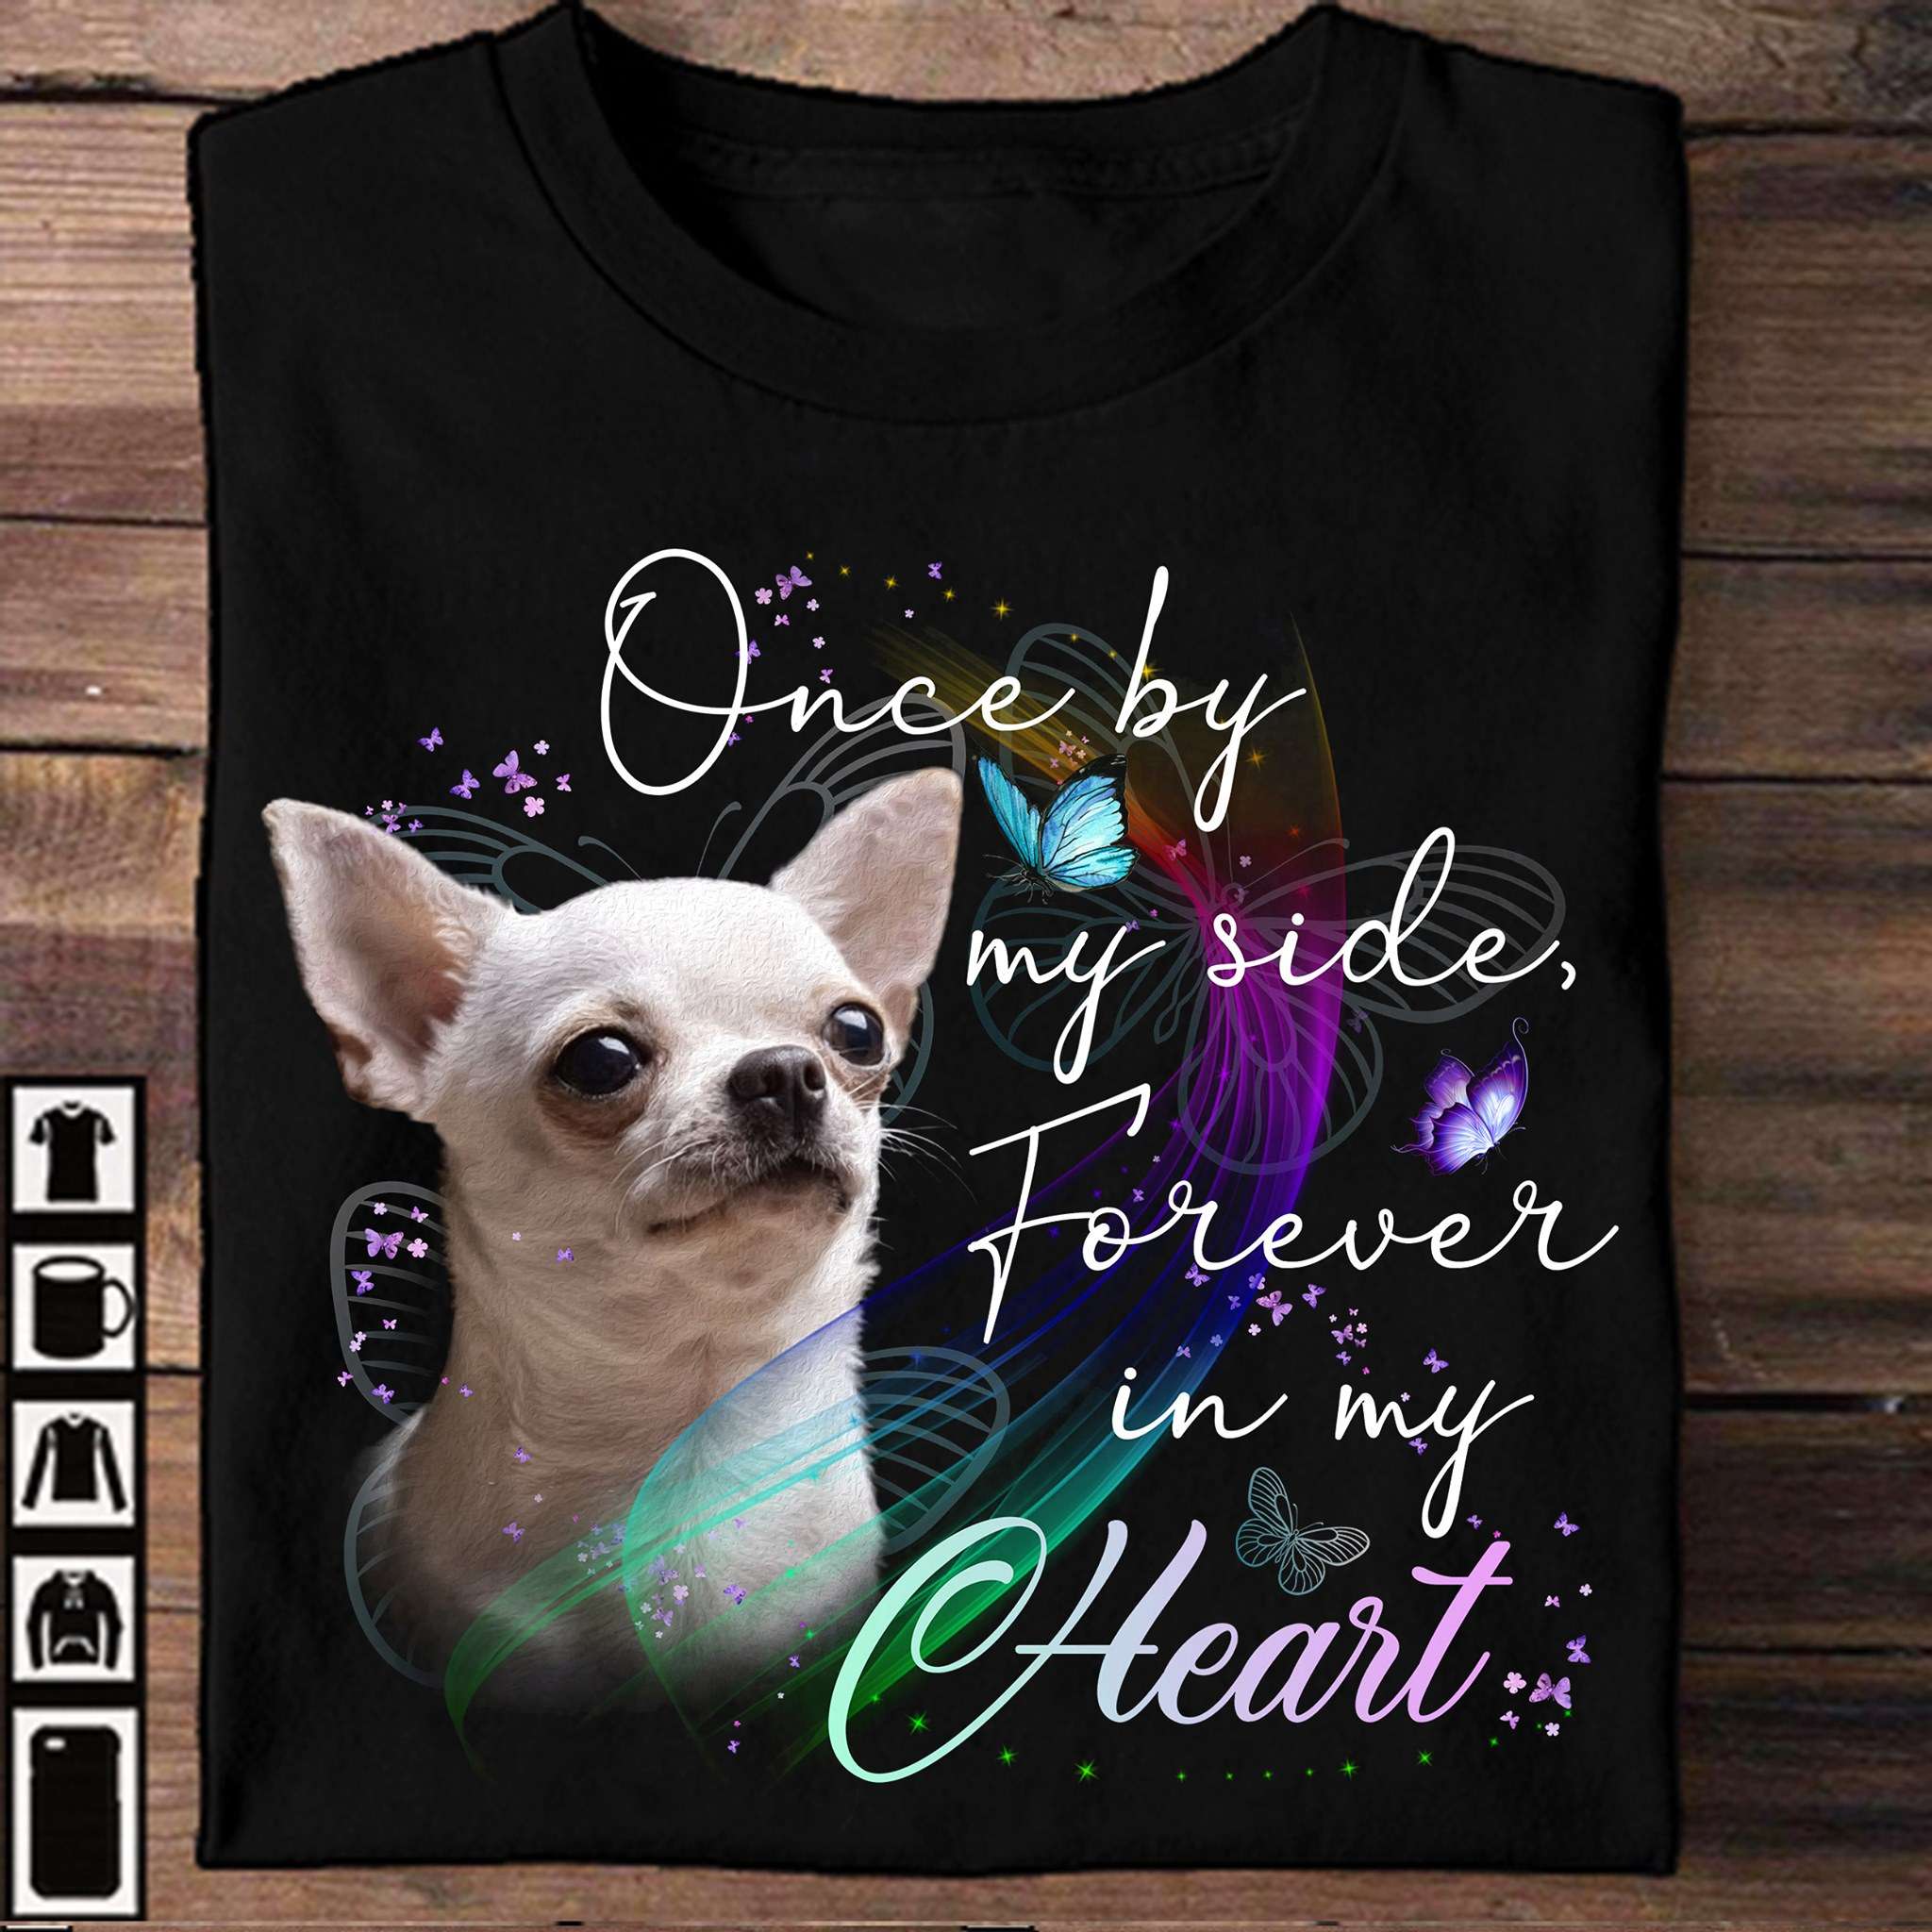 Once by my side, forever in my heart - Chihuahua by my side